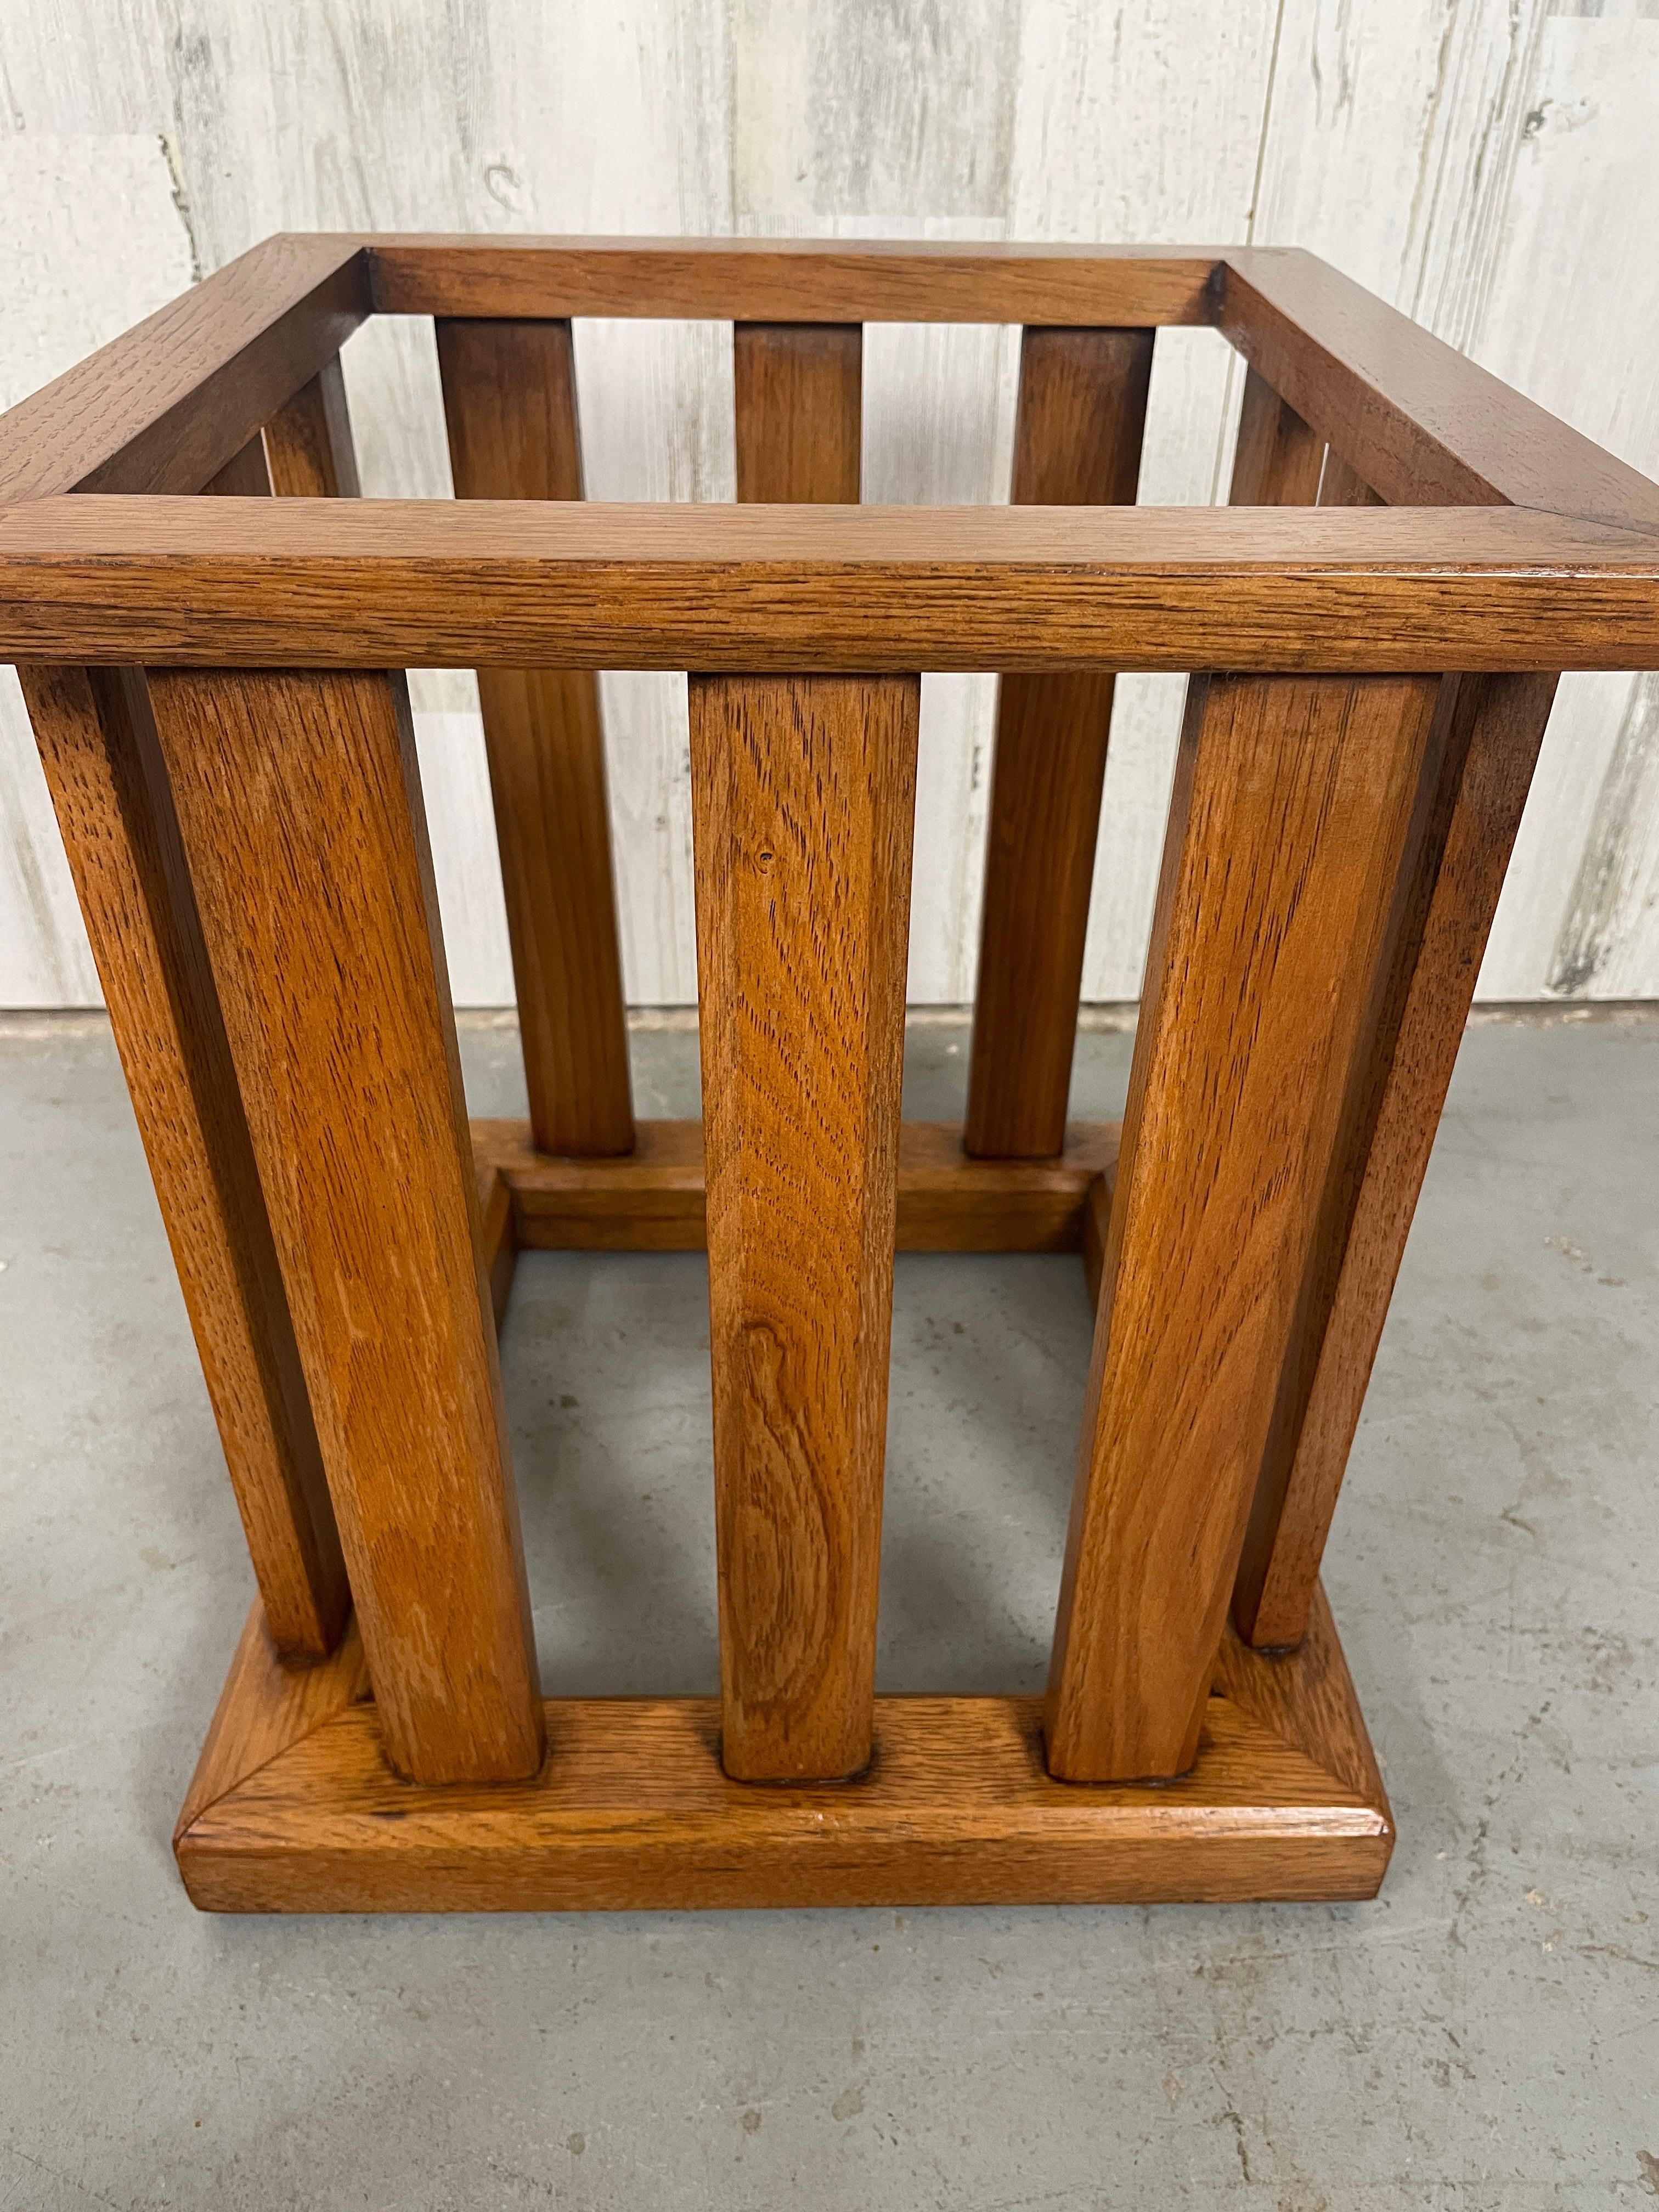 Walnut Slatted Side Tables In Good Condition For Sale In Denton, TX